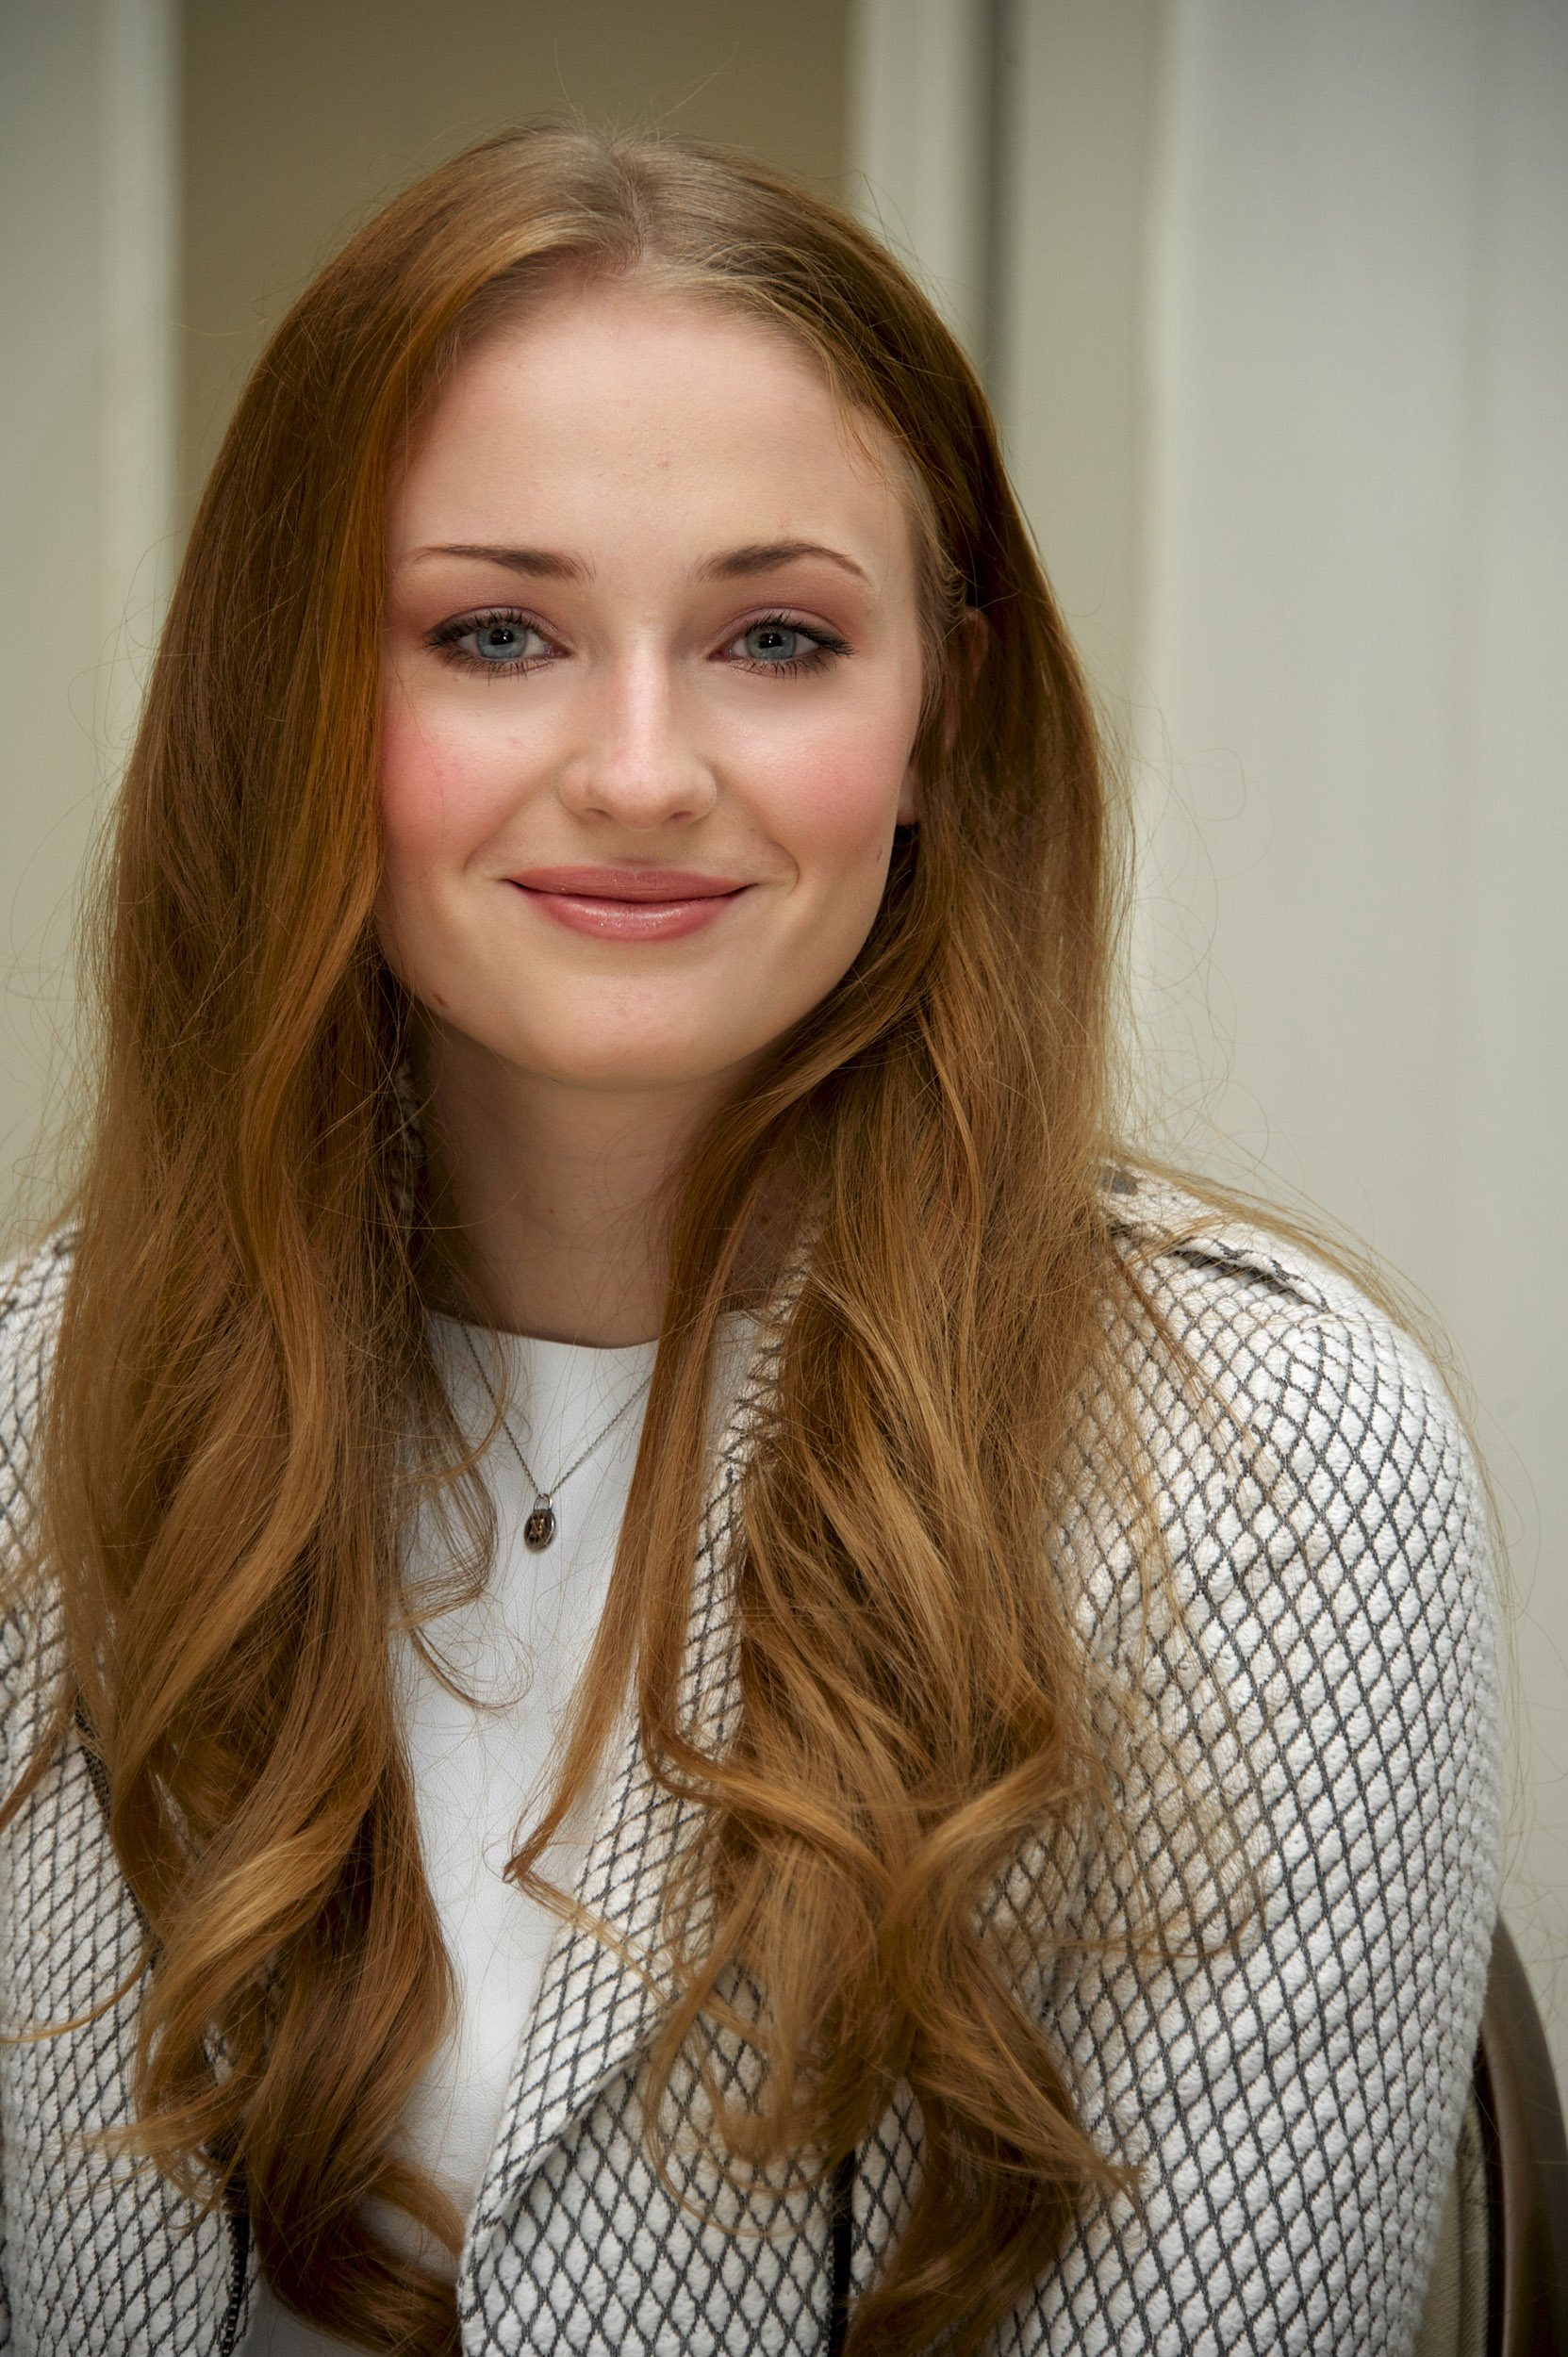 Sophie Turner (actress) photo 405 of 967 pics, wallpaper - photo #752163 - ThePlace21663 x 2500